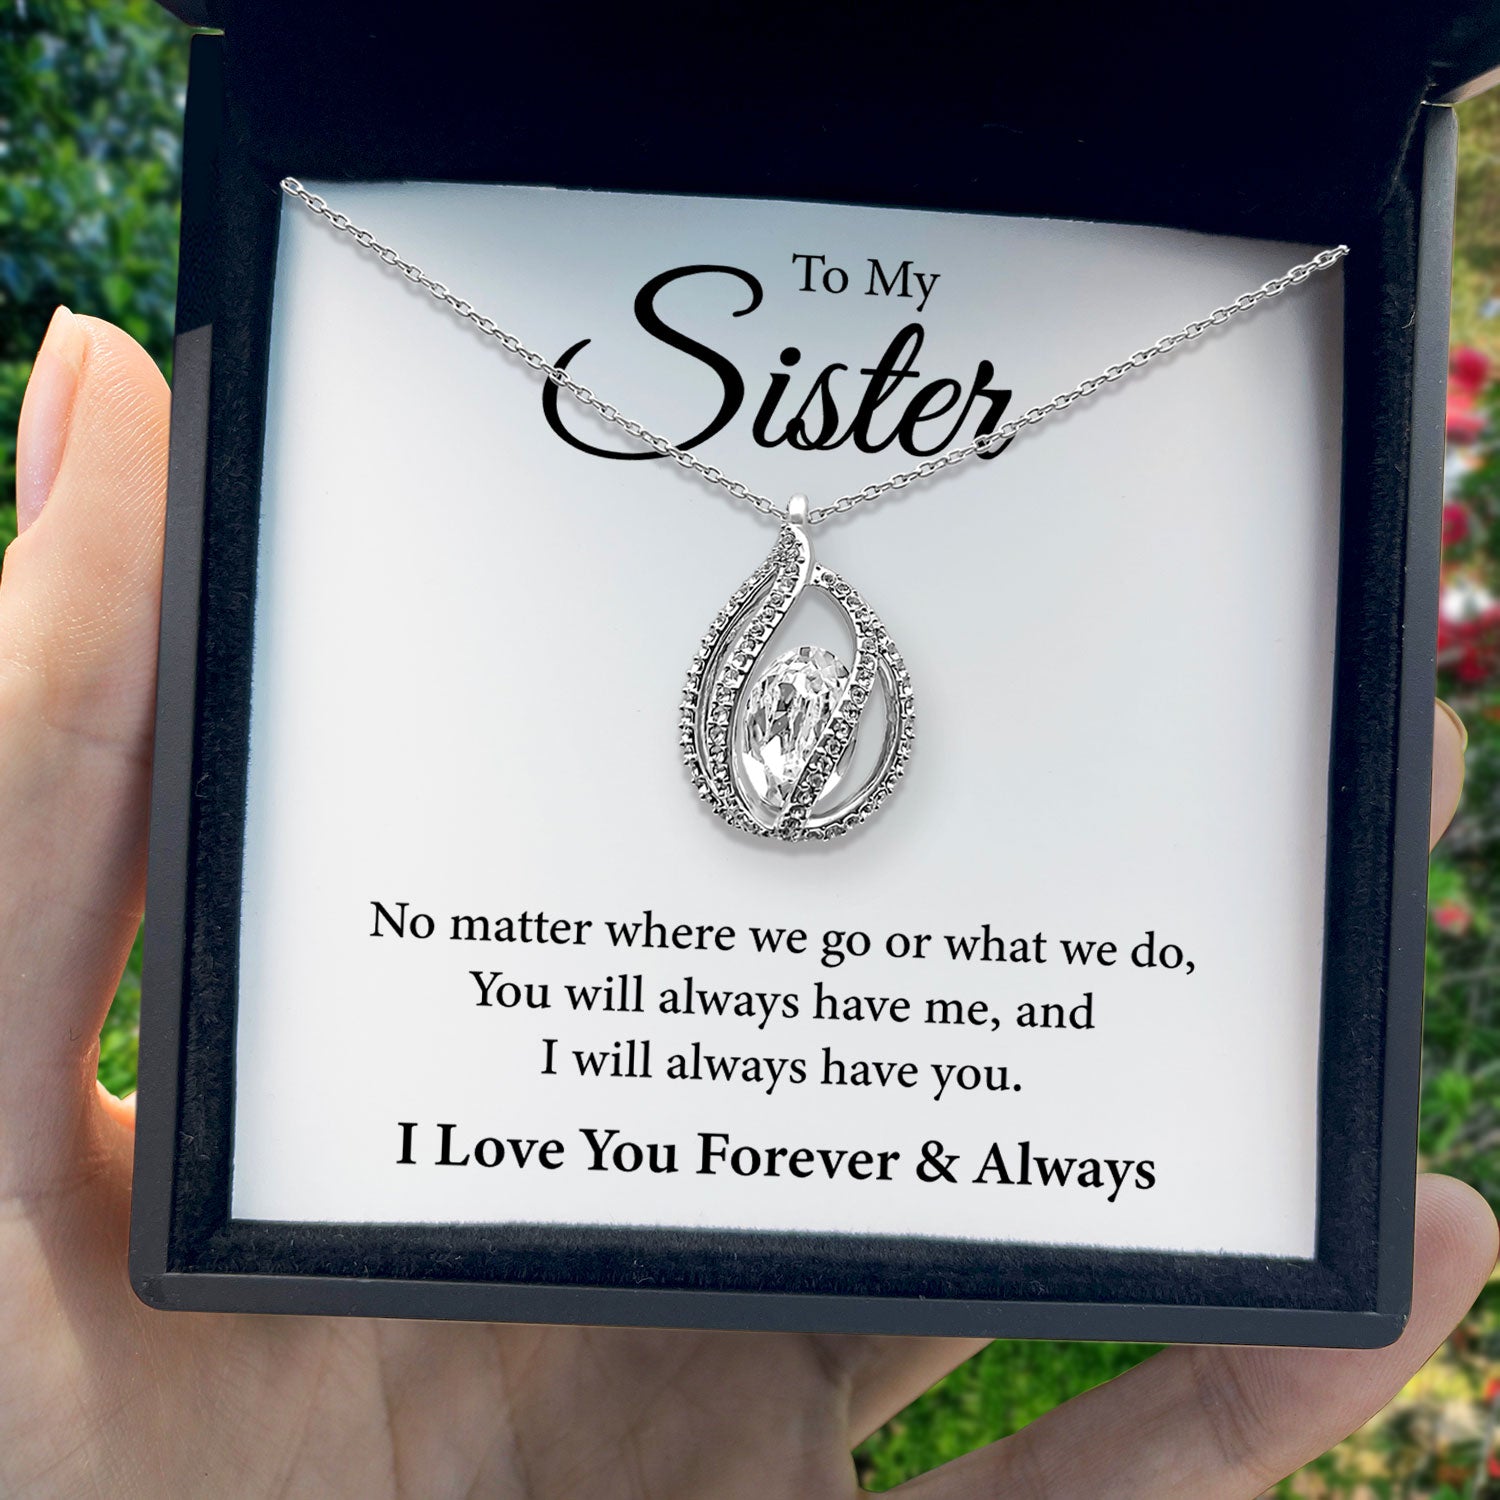 To My Sister - I Will Always Have You - Orbital Birdcage Necklace